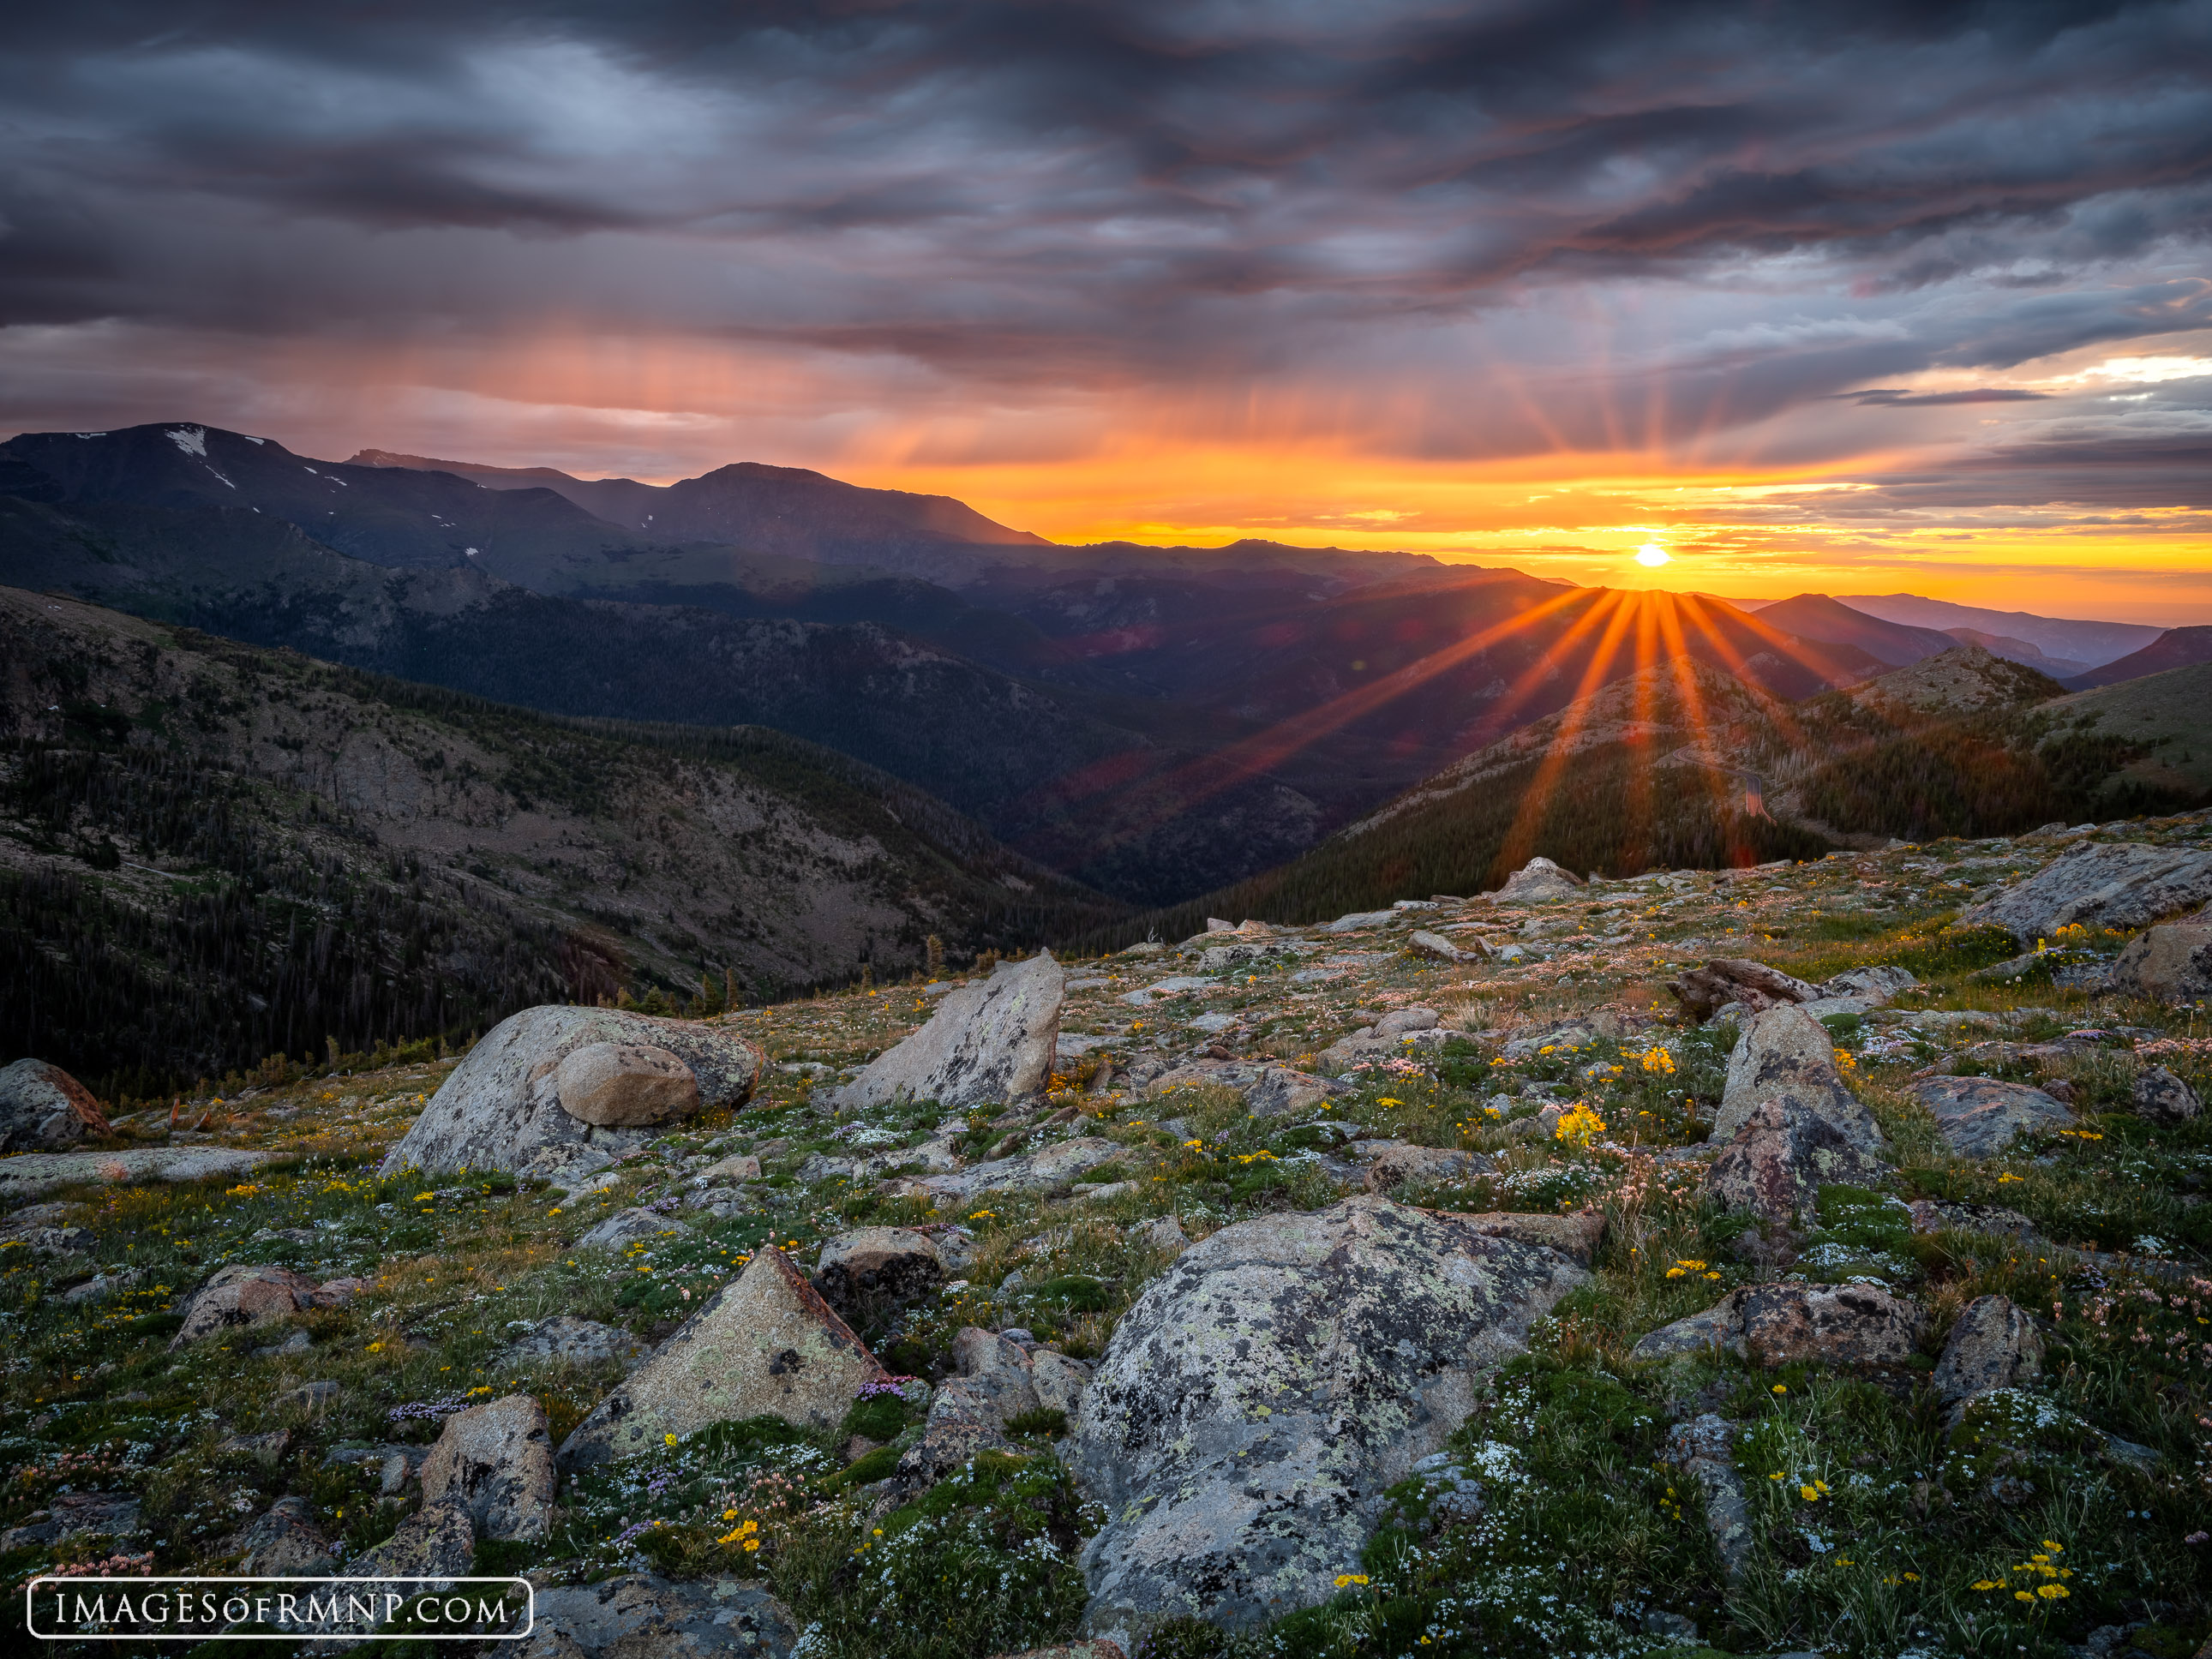 A new day of beauty dawns on Rocky Mountain National Park. The tundra is bursting with flowers as if celebrating each hour of...